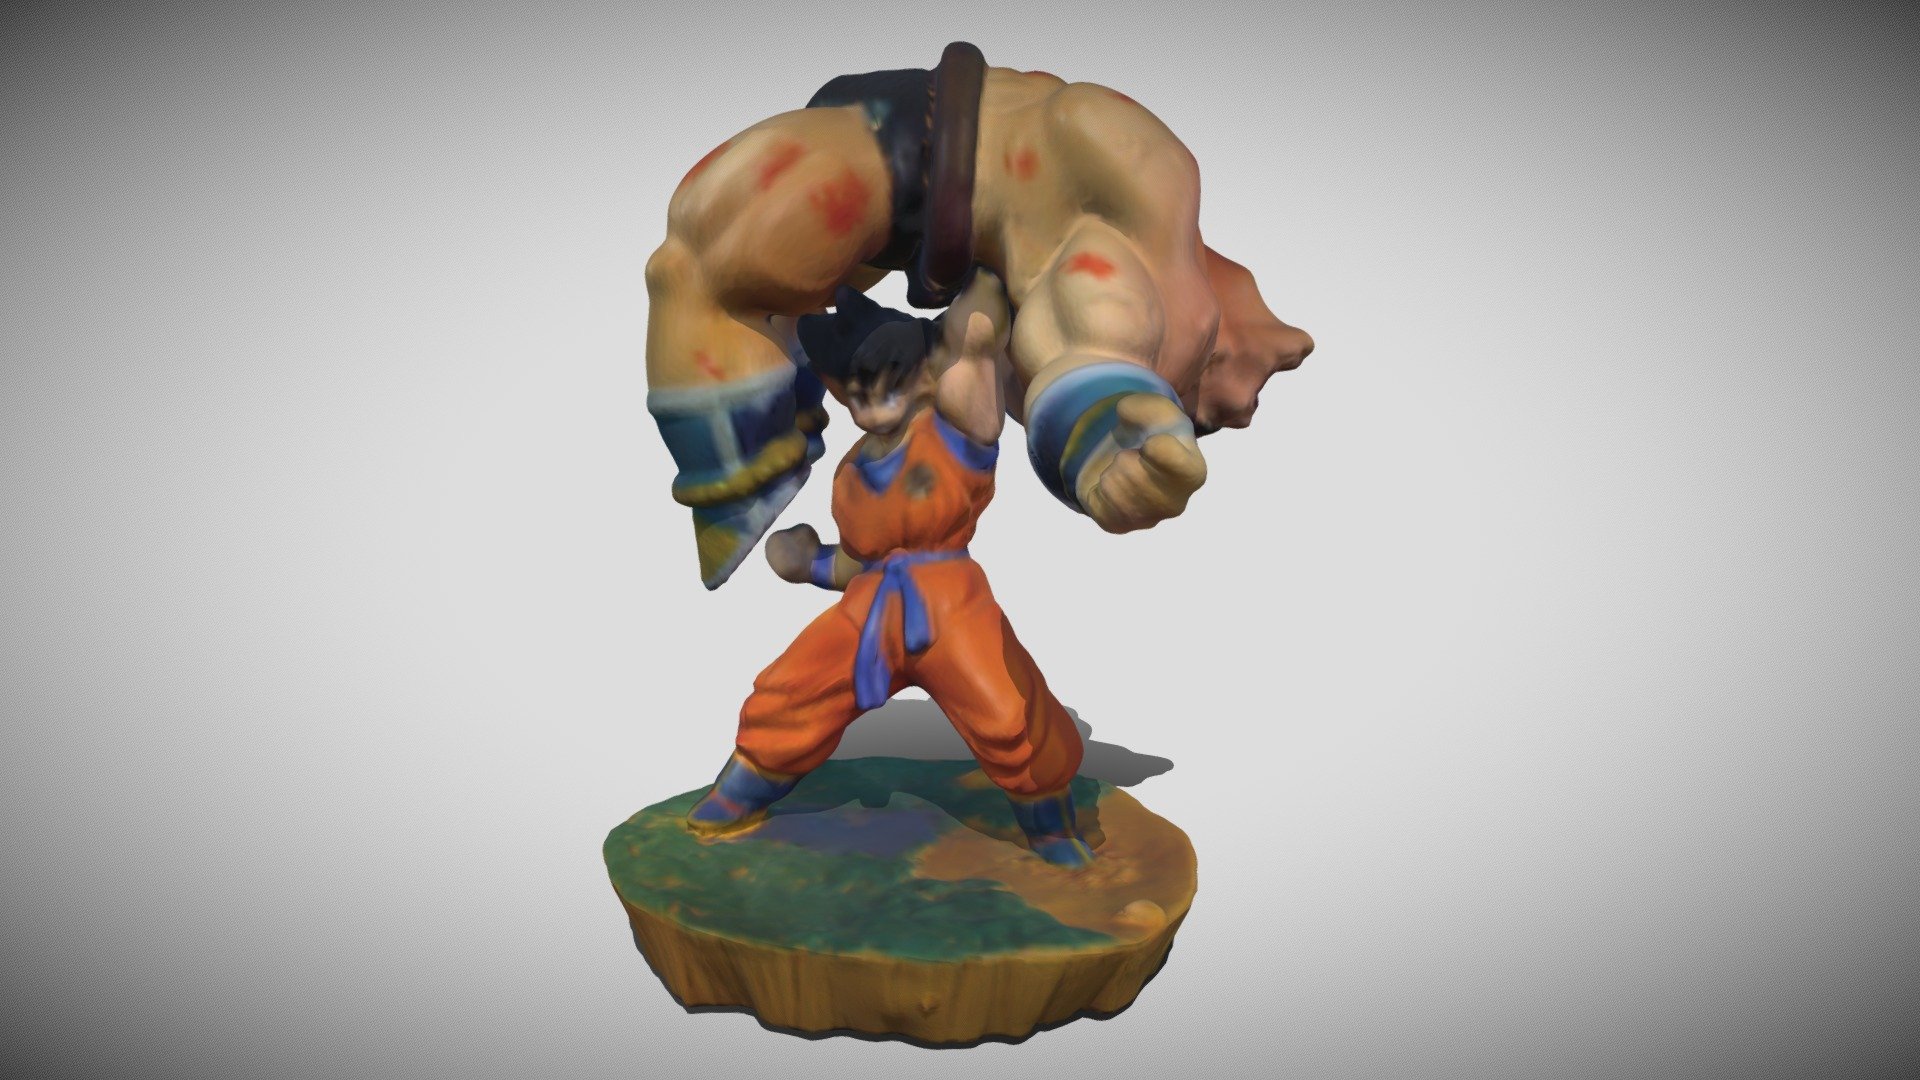 3D-scan of DBZ anime figurine. Goku fighting Nappa. Scanned with Einscan, processed in Zbrush. 3D Printable file included 3d model